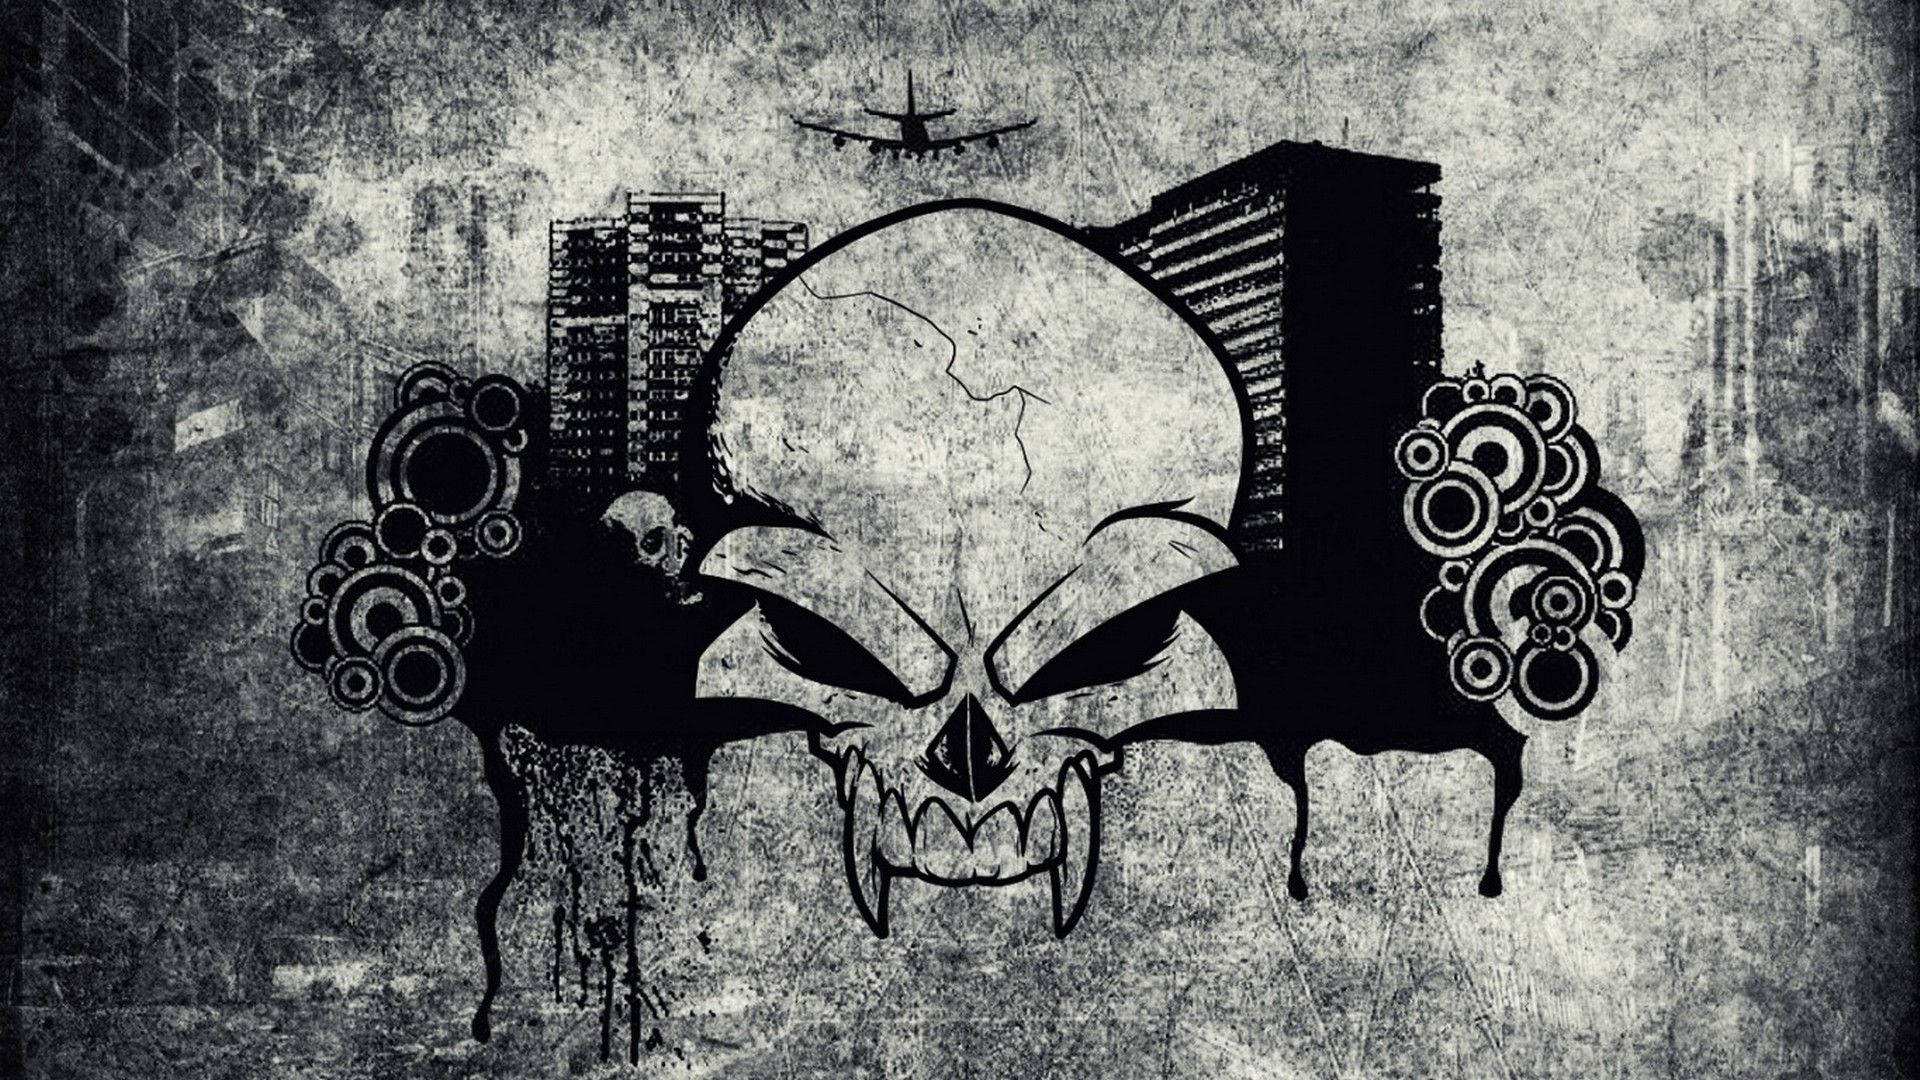 Black And White Graffiti Skull With Fangs Wallpaper